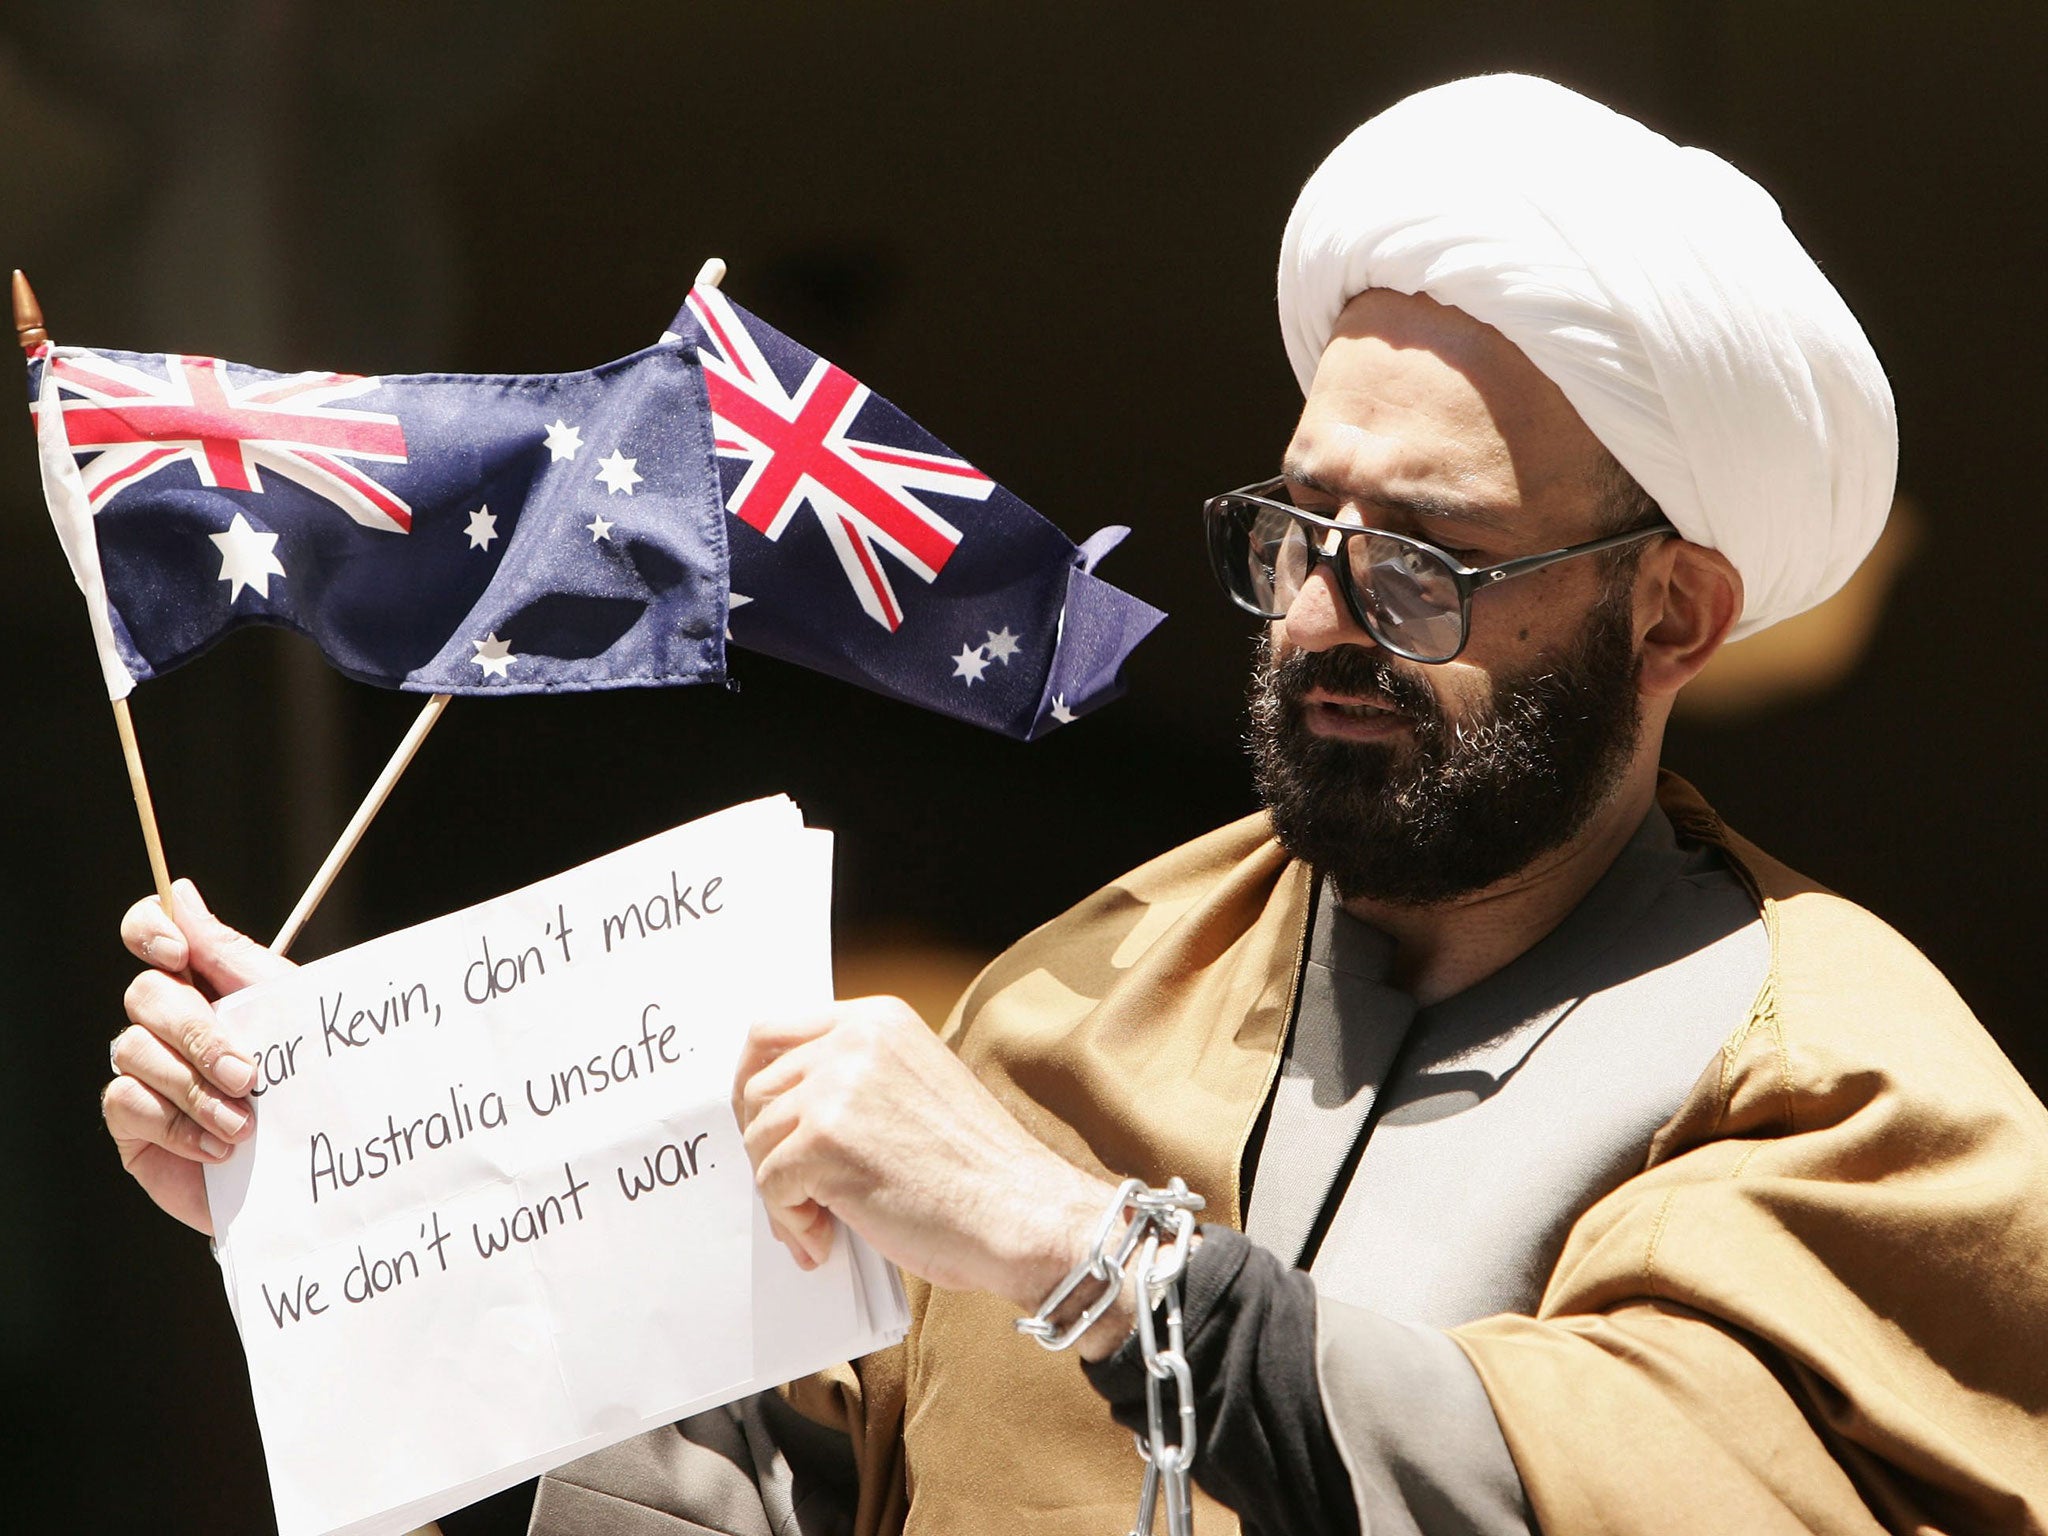 Man Haron Monis, who emigrated to Australia from Iran in 1996, claimed he had been continually under attack by the Australian government since 2007. He was scheduled to appear in court in February after being arrested in October and charged with dozens of